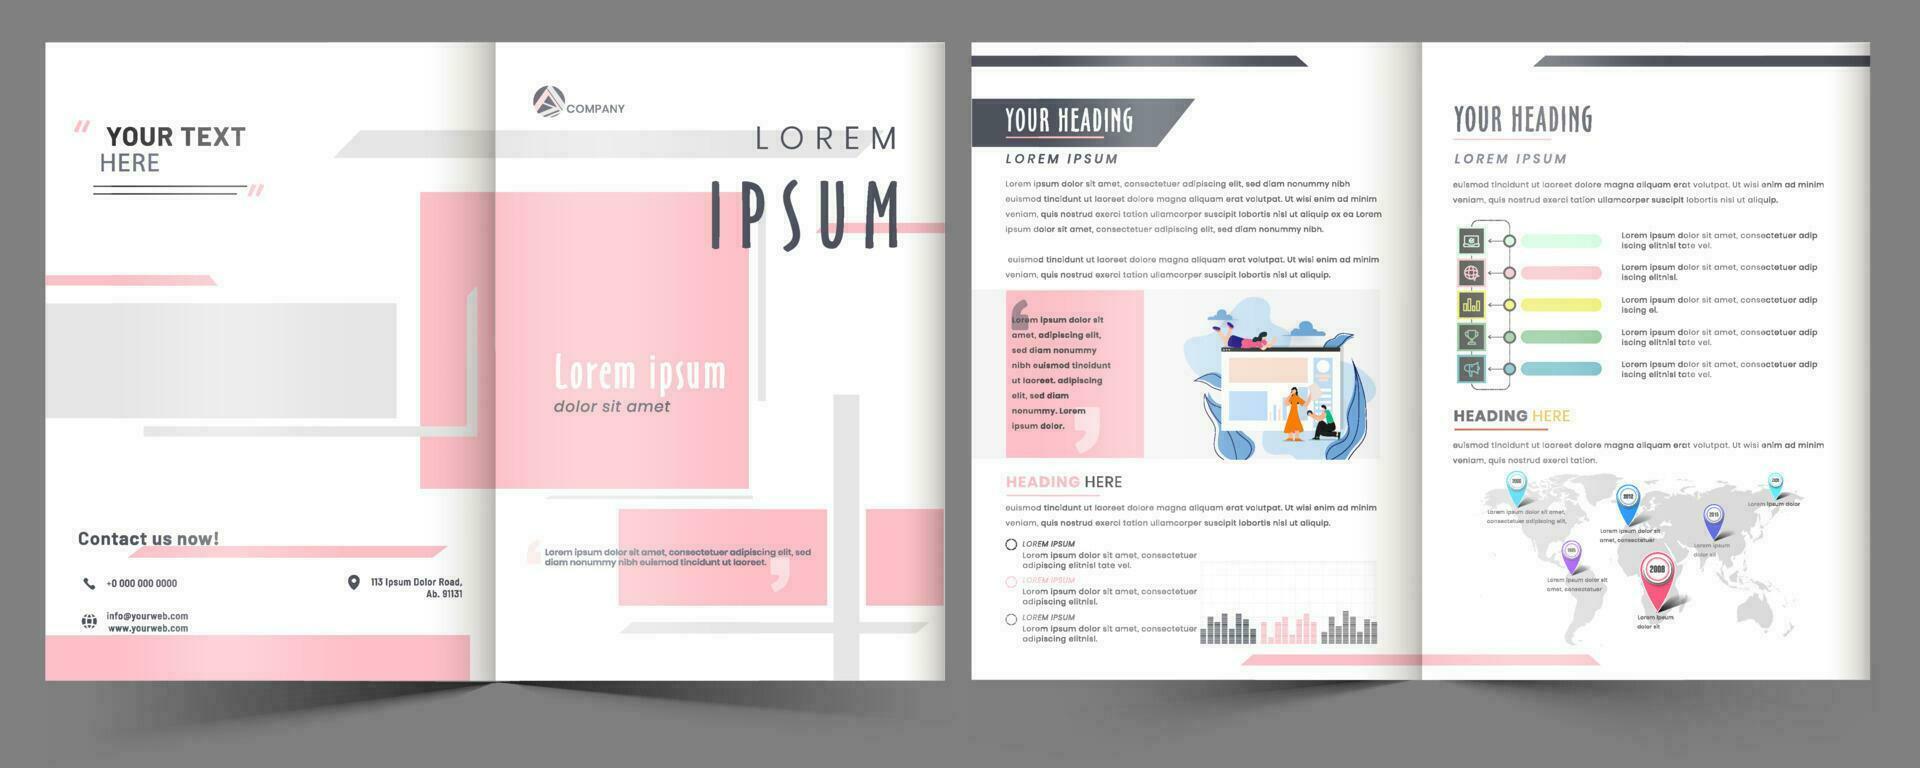 Front and Back View of Business Bi-Fold Brochure, Template or Cover Page Layout with Company Growth Presentation. vector